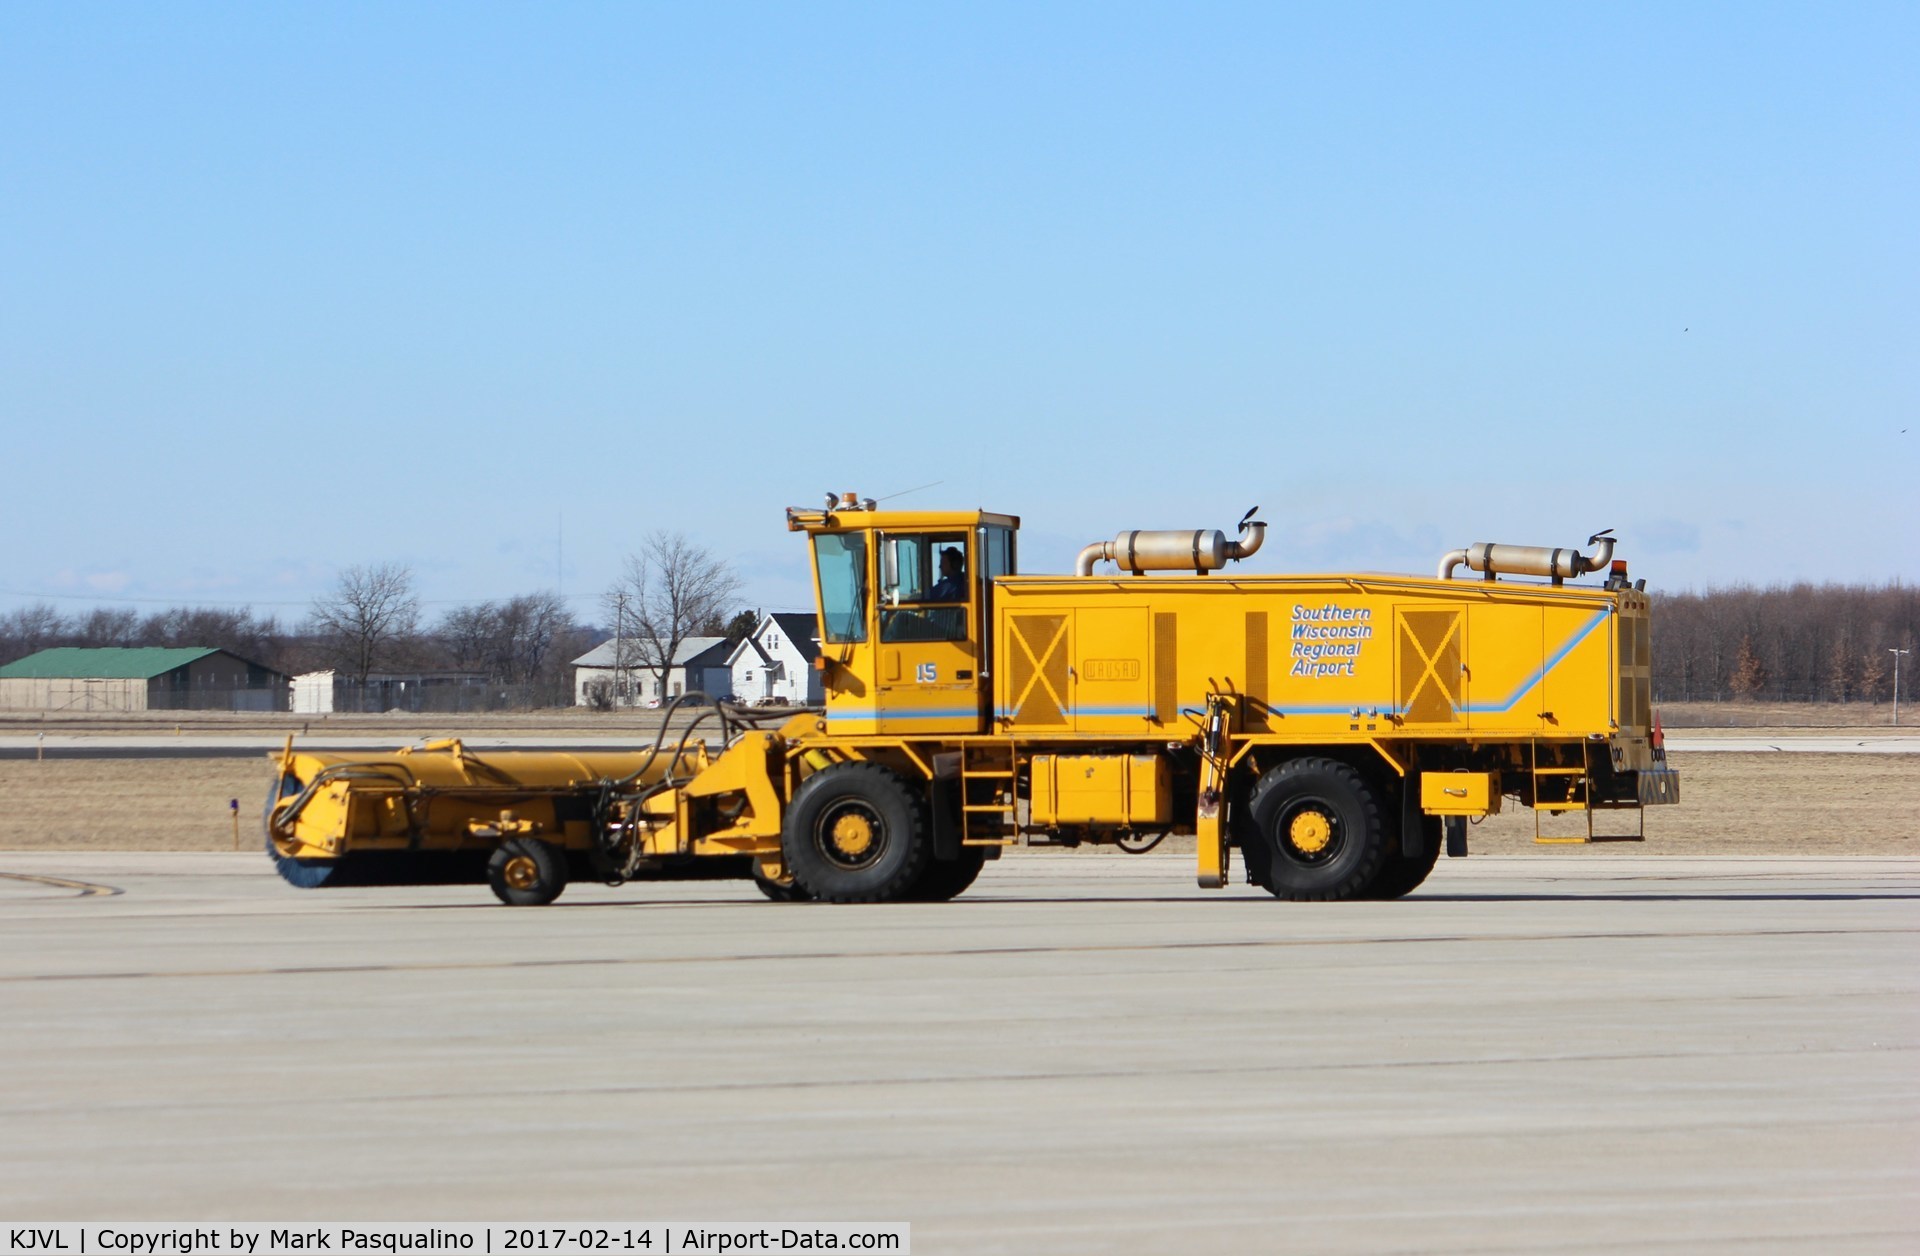 Southern Wisconsin Regional Airport (JVL) - Sweeper